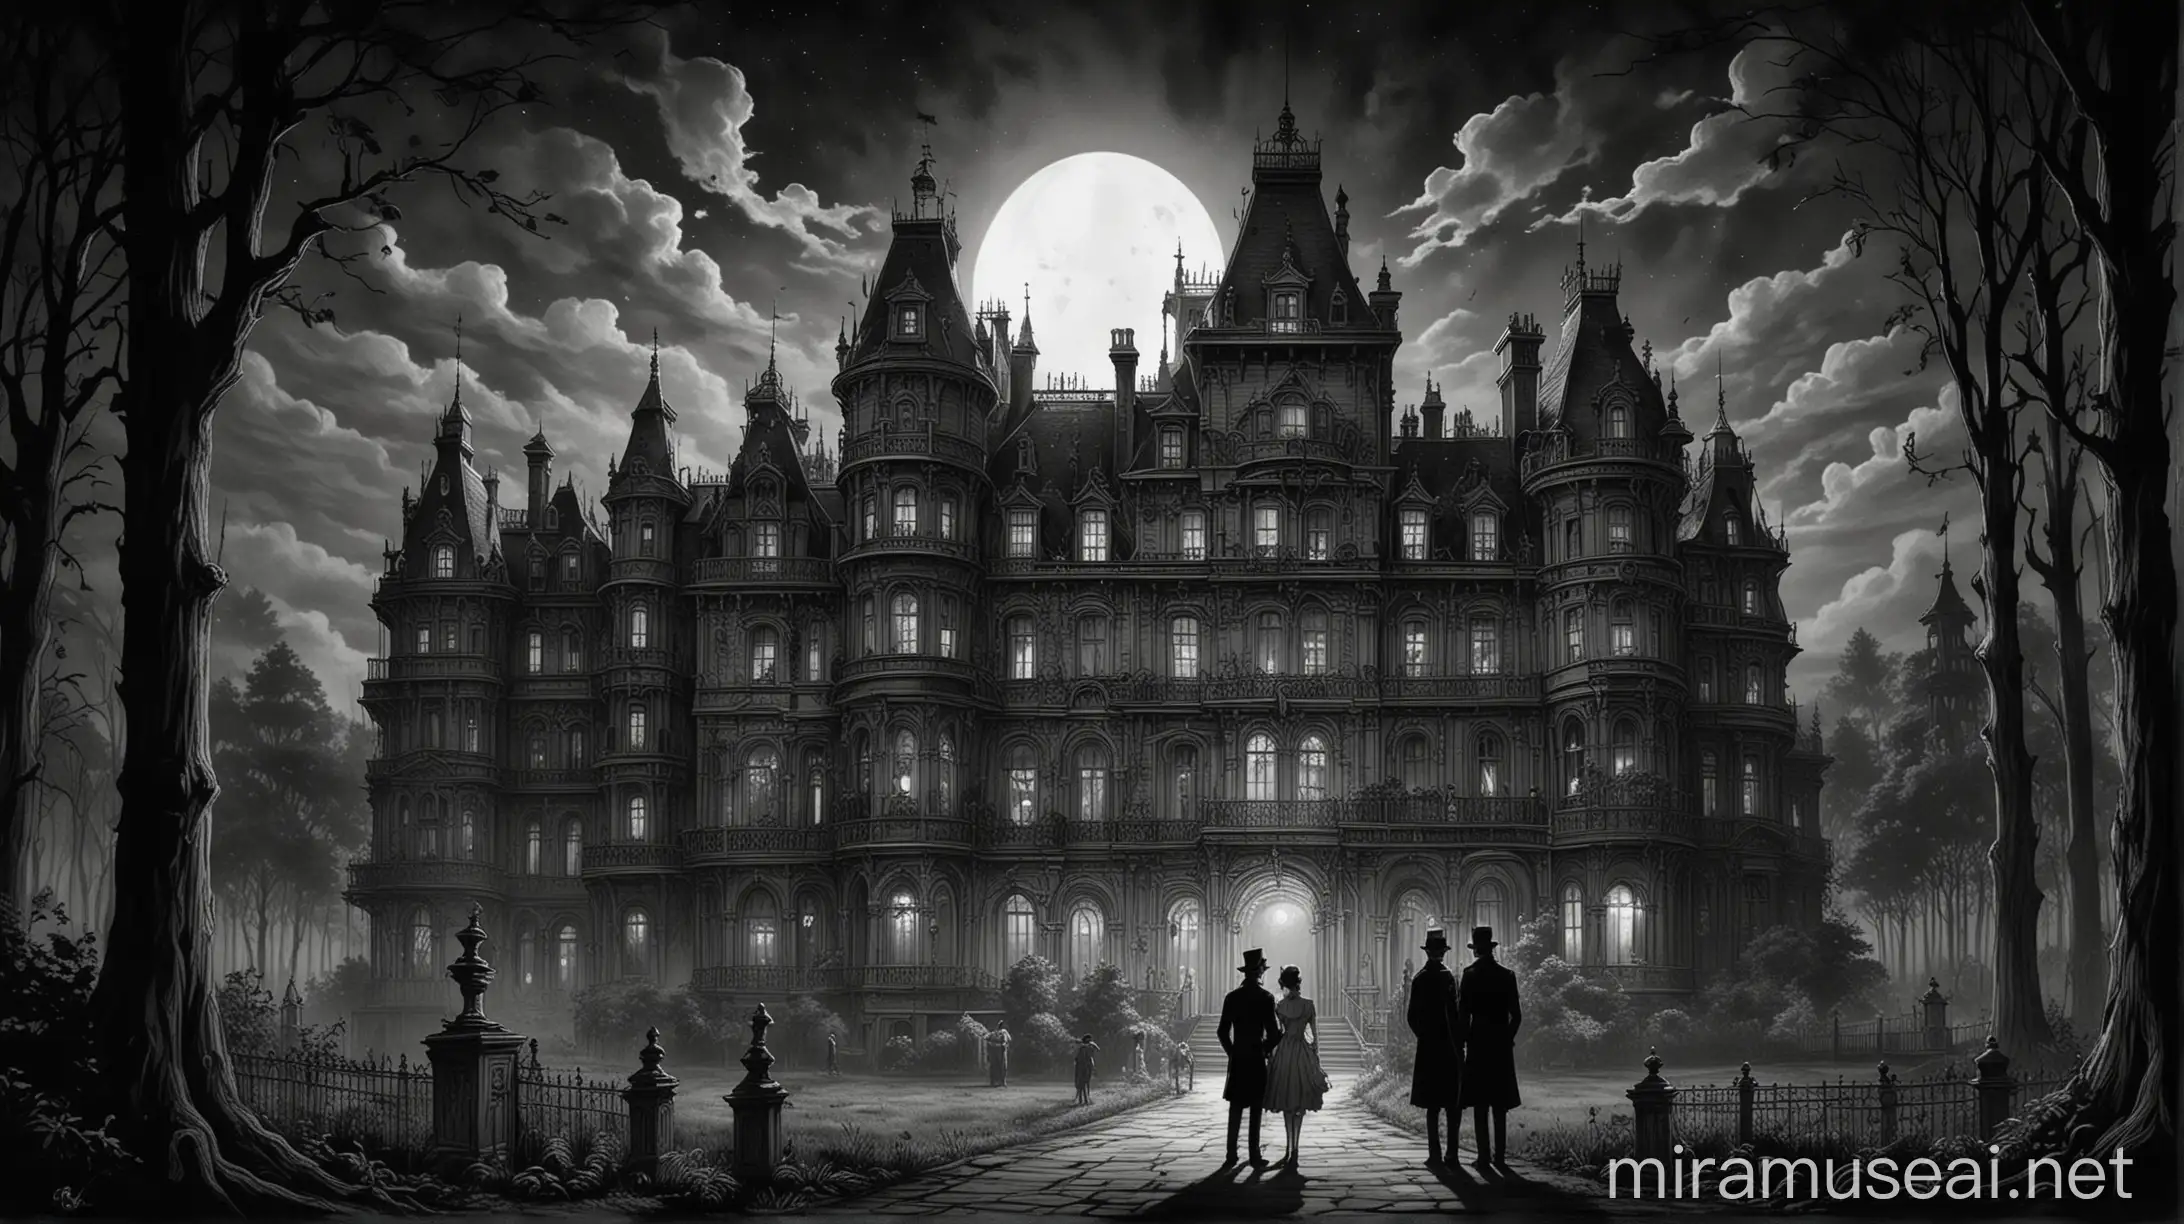 A Tim Burton-style drawing of a Belle Époque two male noir detectives standing next to a colossal Victorian palace with 1000 rooms, many towers and rooms in a shadowy forest with gardens, on a dark night.